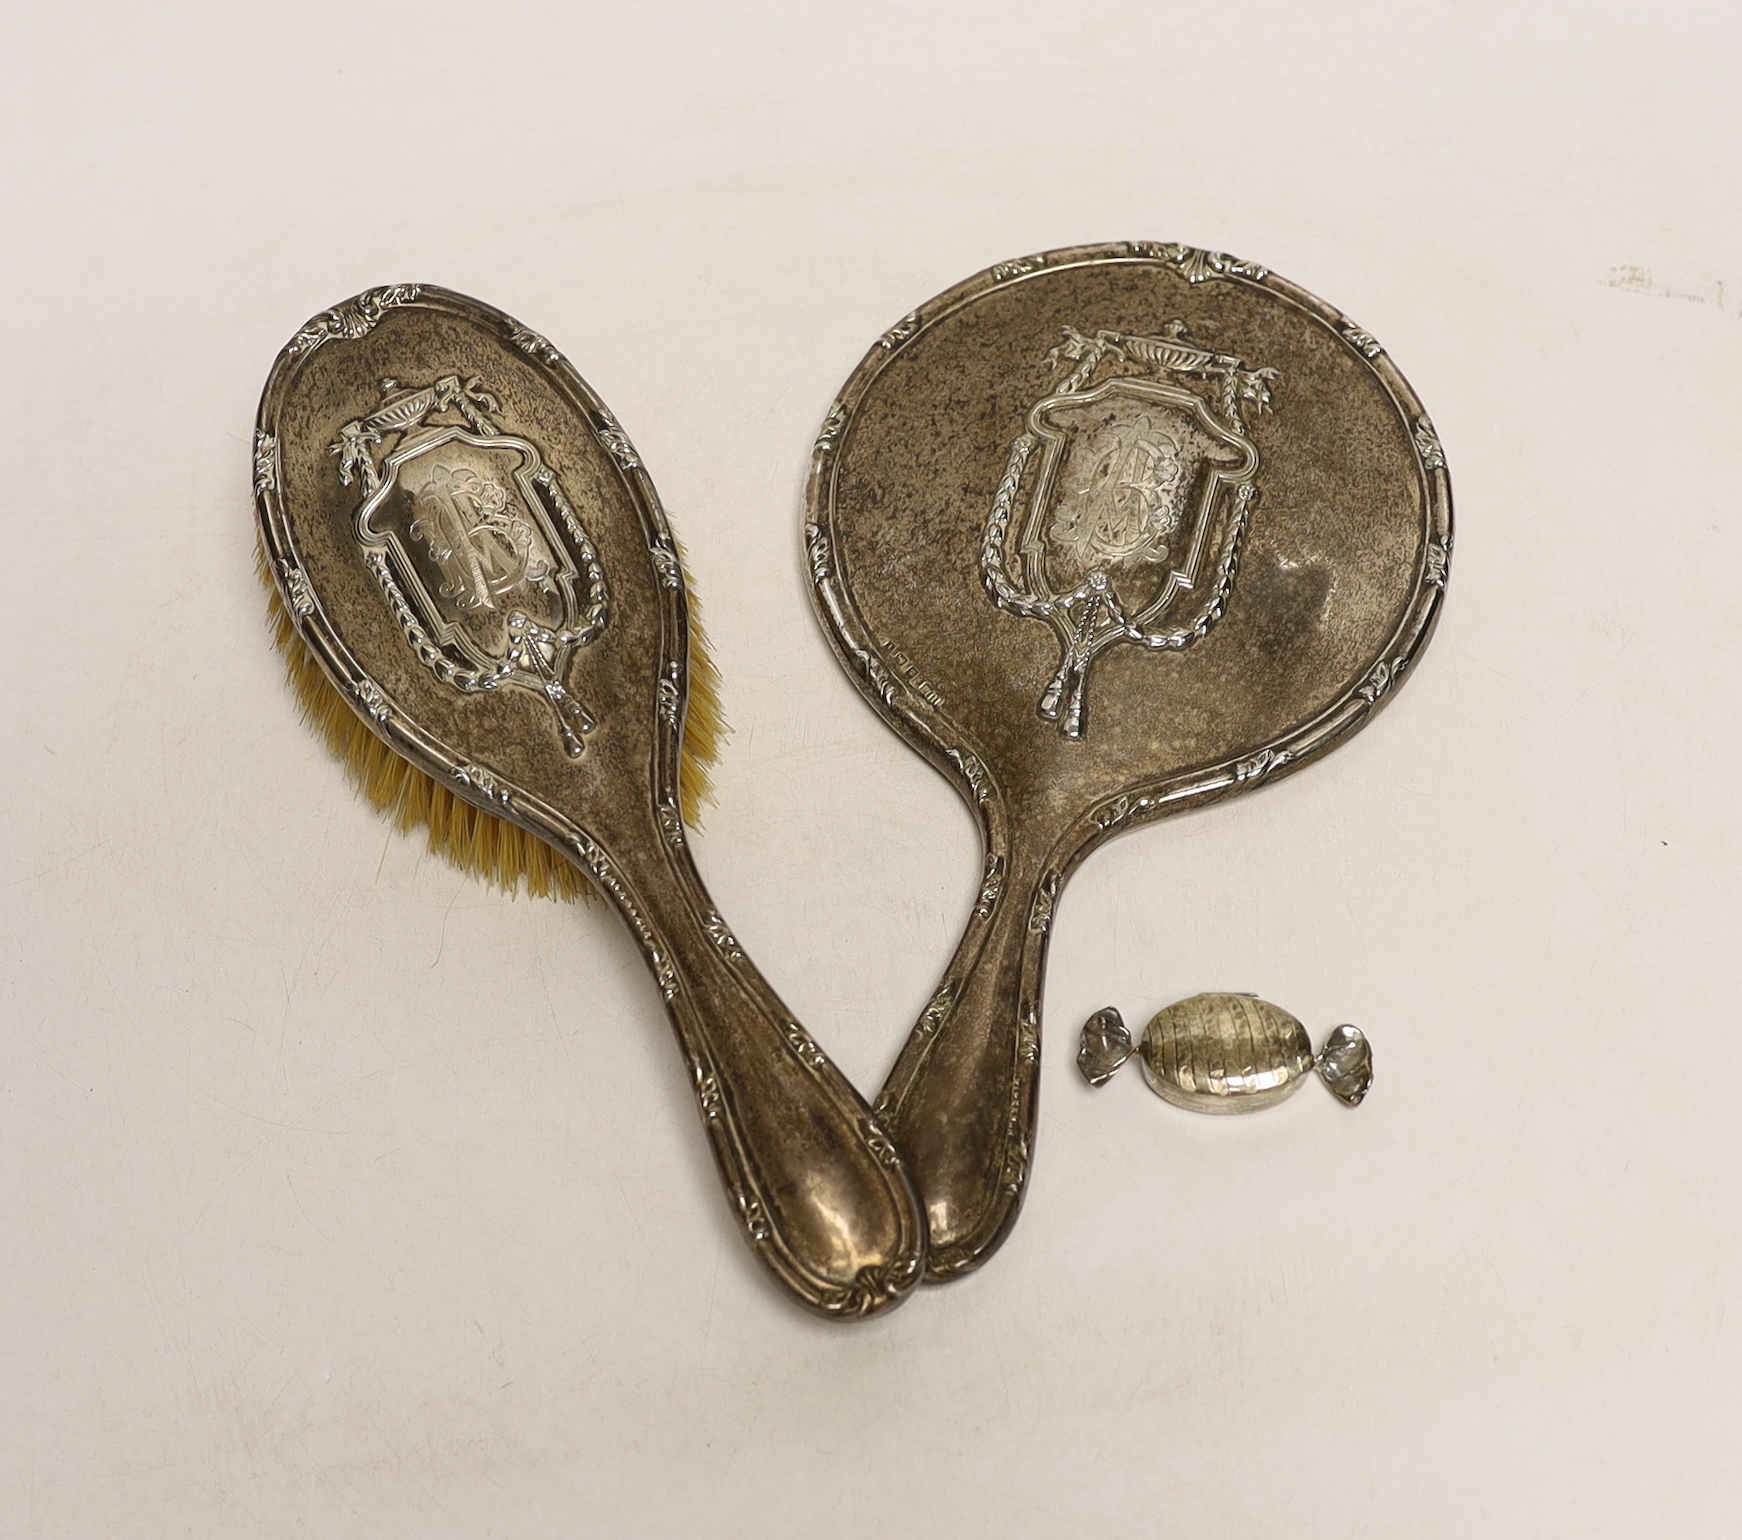 An Edwardian silver mounted hand mirror and hair brush, Henry Matthews, Birmingham, 1908 and a modern 925 pill box modelled as a wrapped sweet.